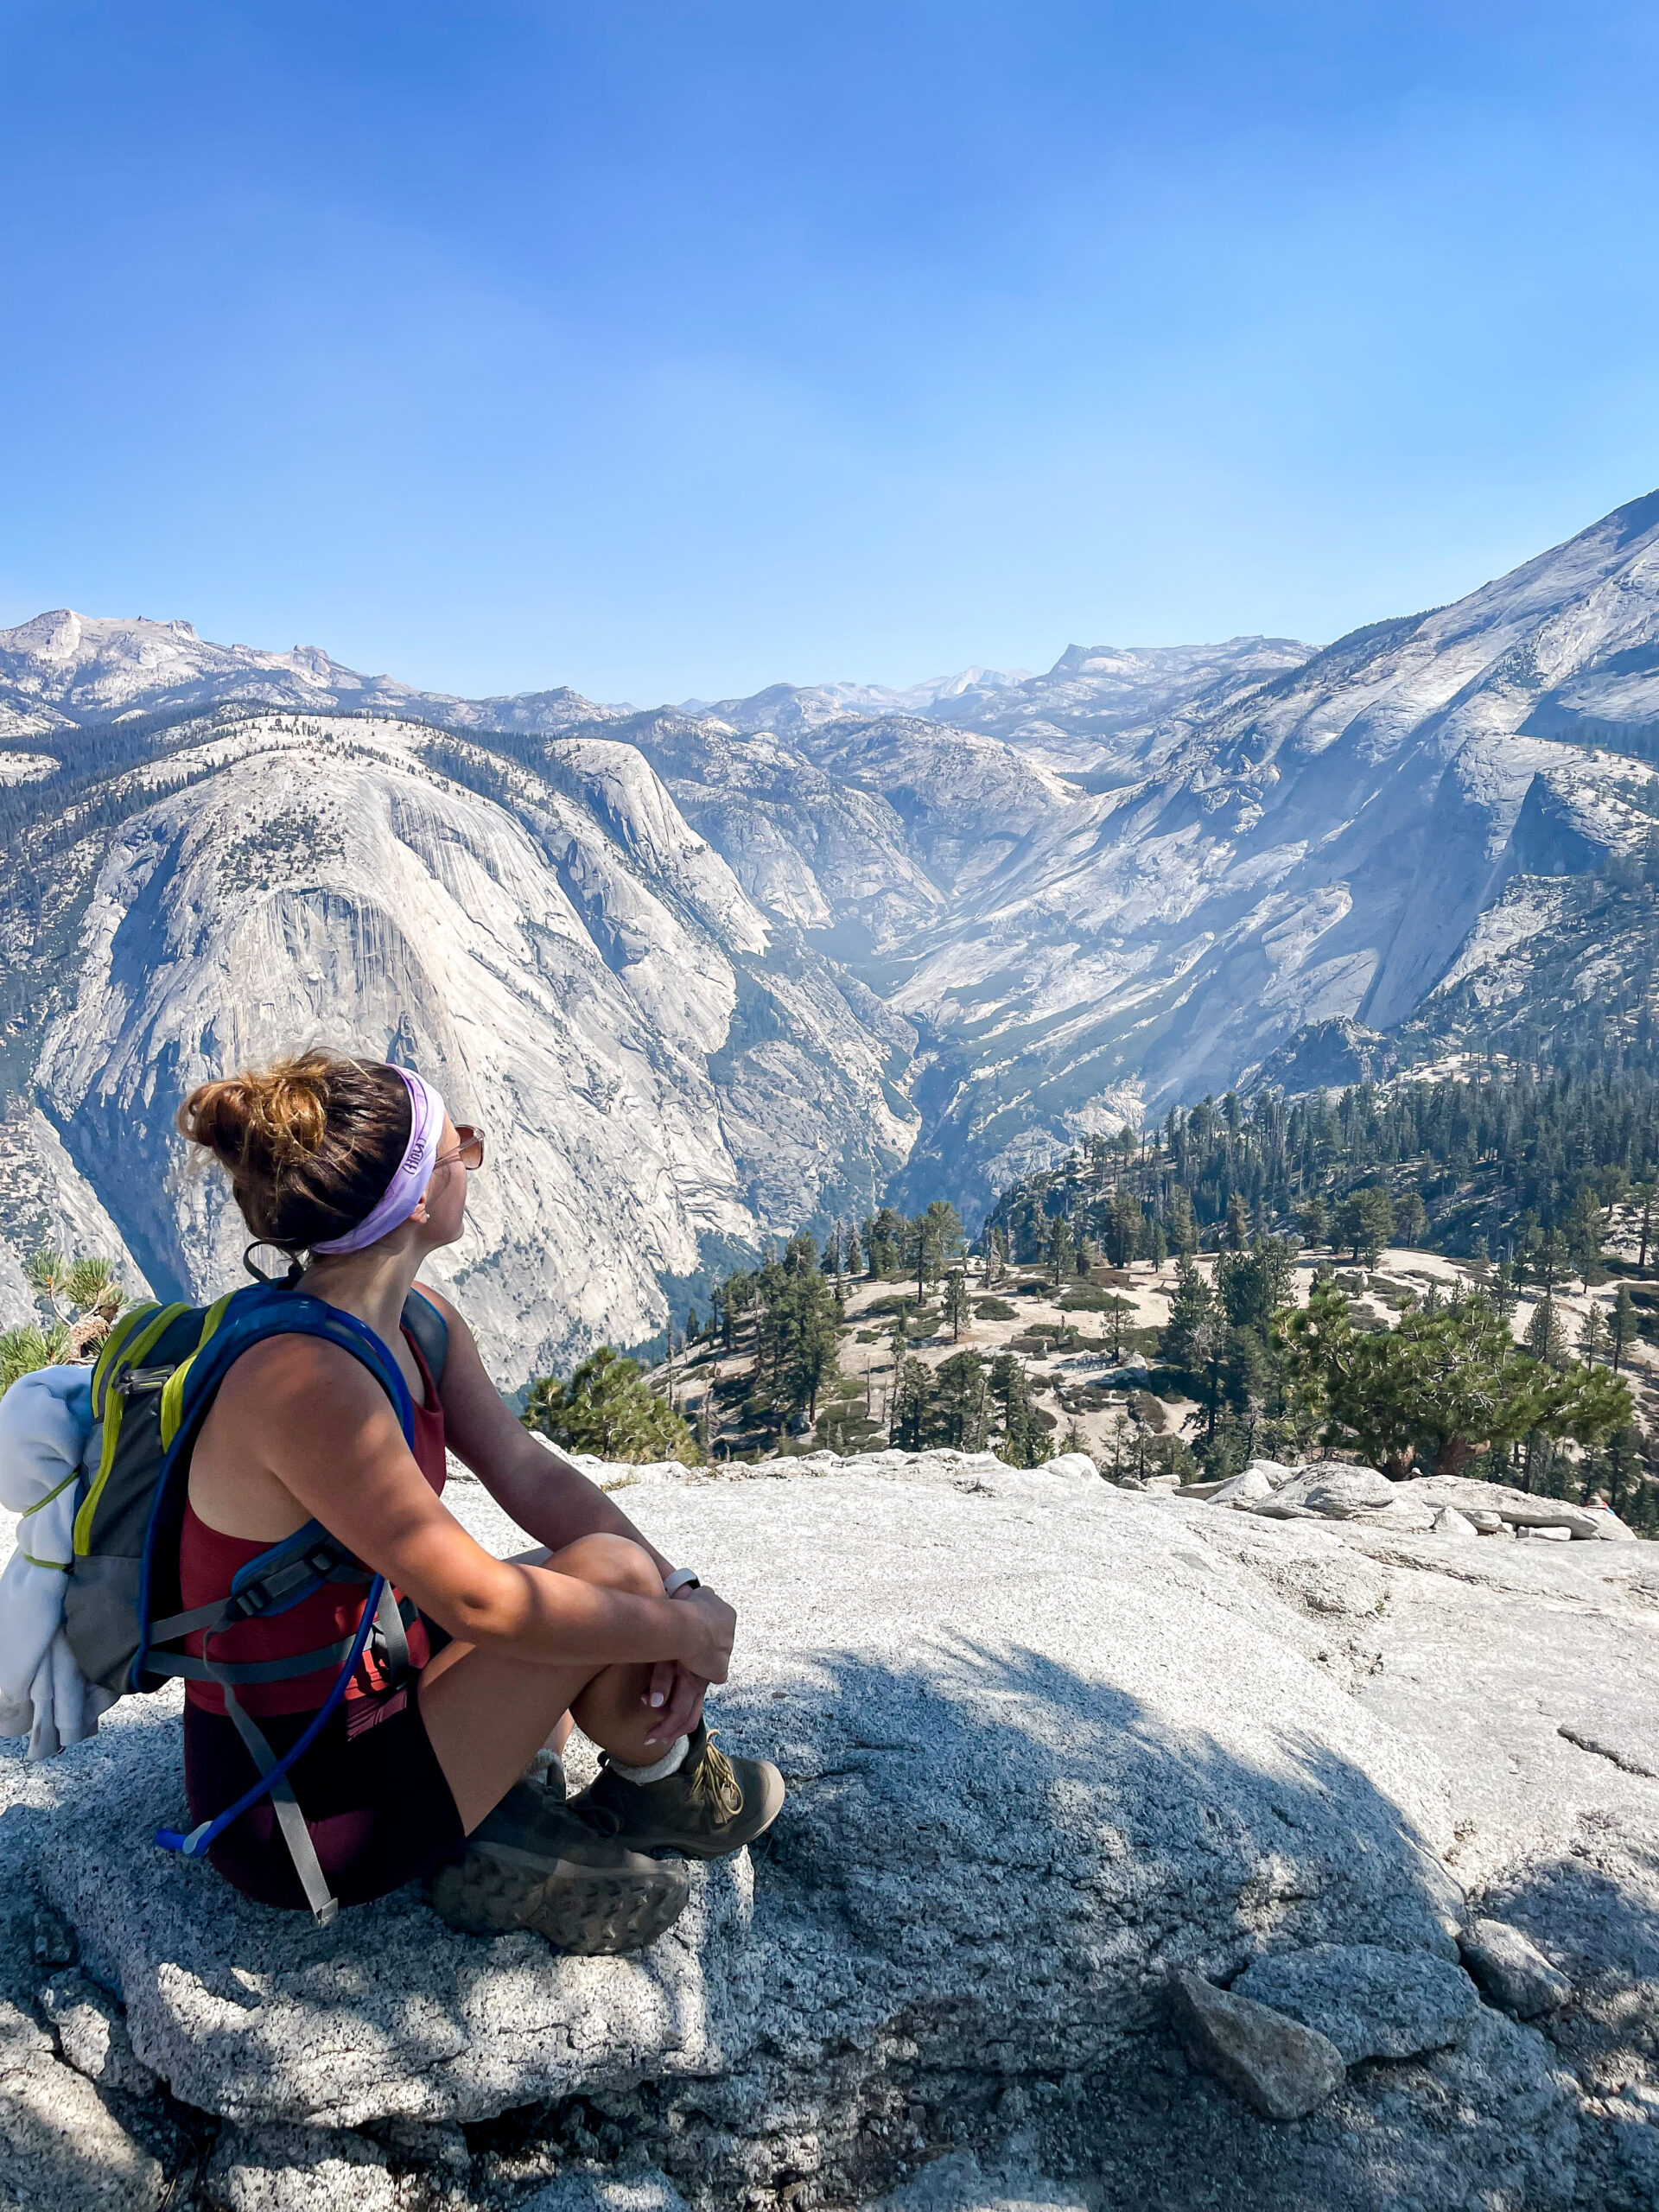 View from the top of Half Dome Yosemite